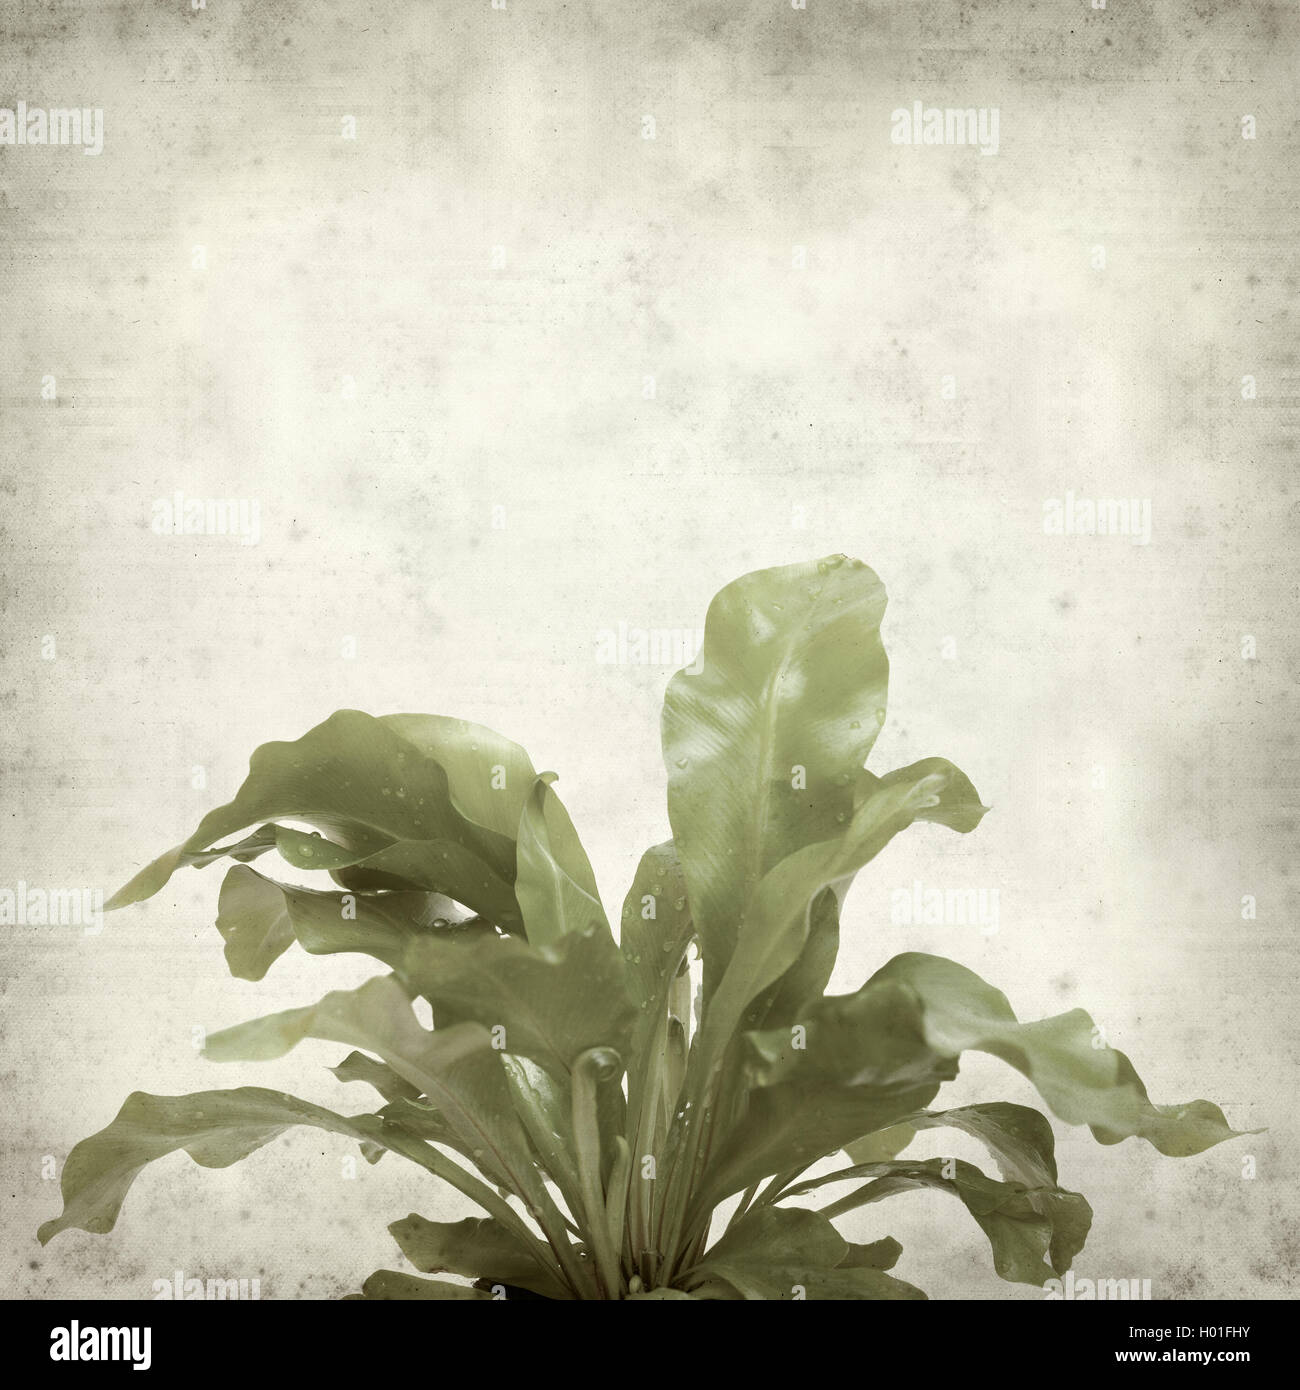 textured old paper background with bird nest fern plant Stock Photo